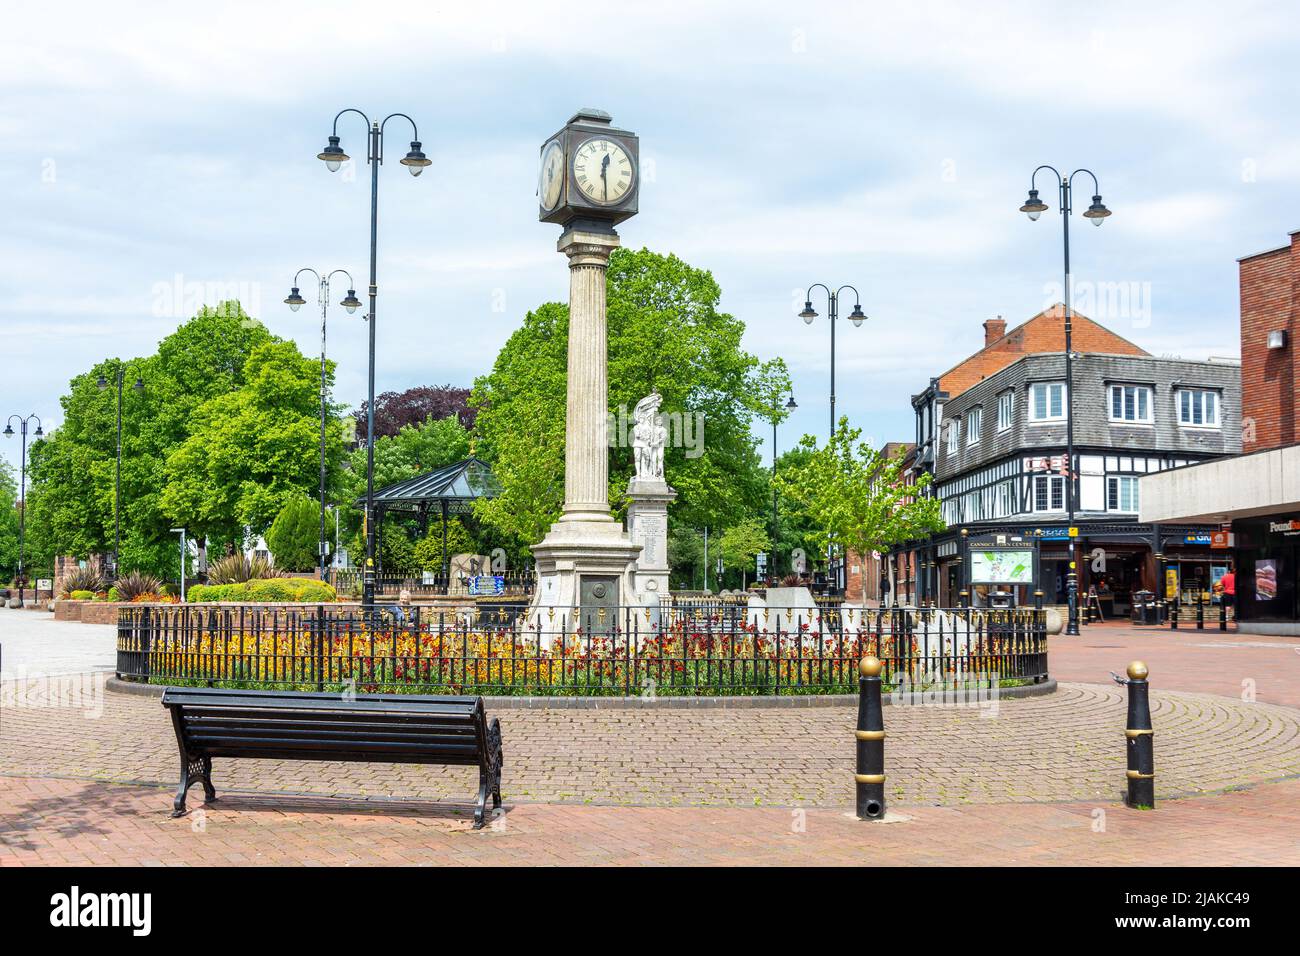 Memorial Clock, Market place, Cannock, Staffordshire, Angleterre, Royaume-Uni Banque D'Images